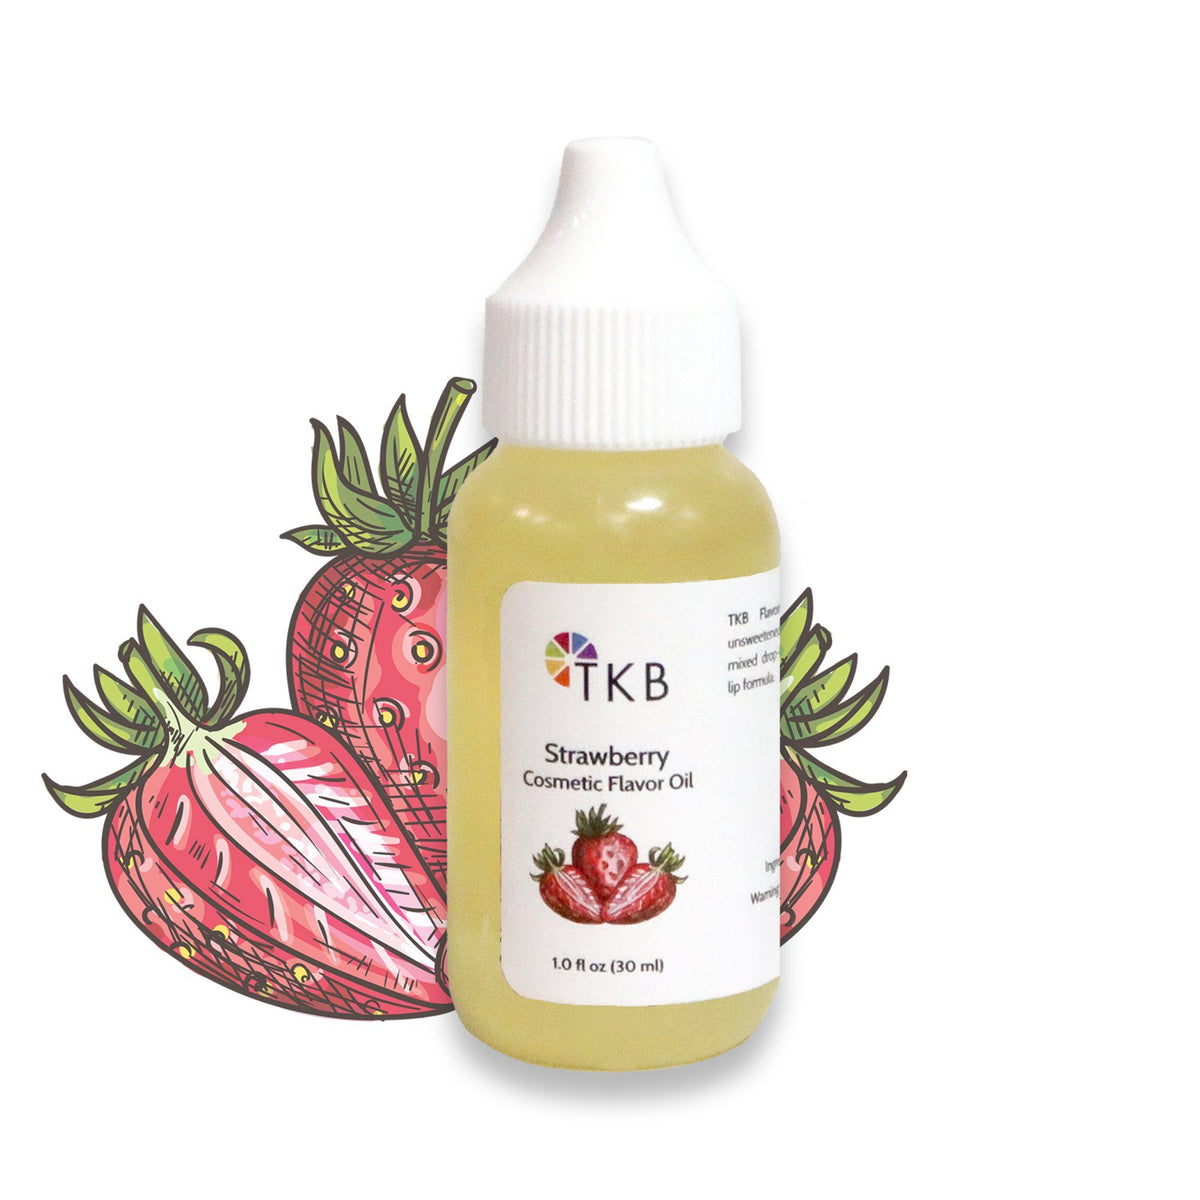 Strawberry and Watermelon Fragrance Oil - Refreshingly Juicy